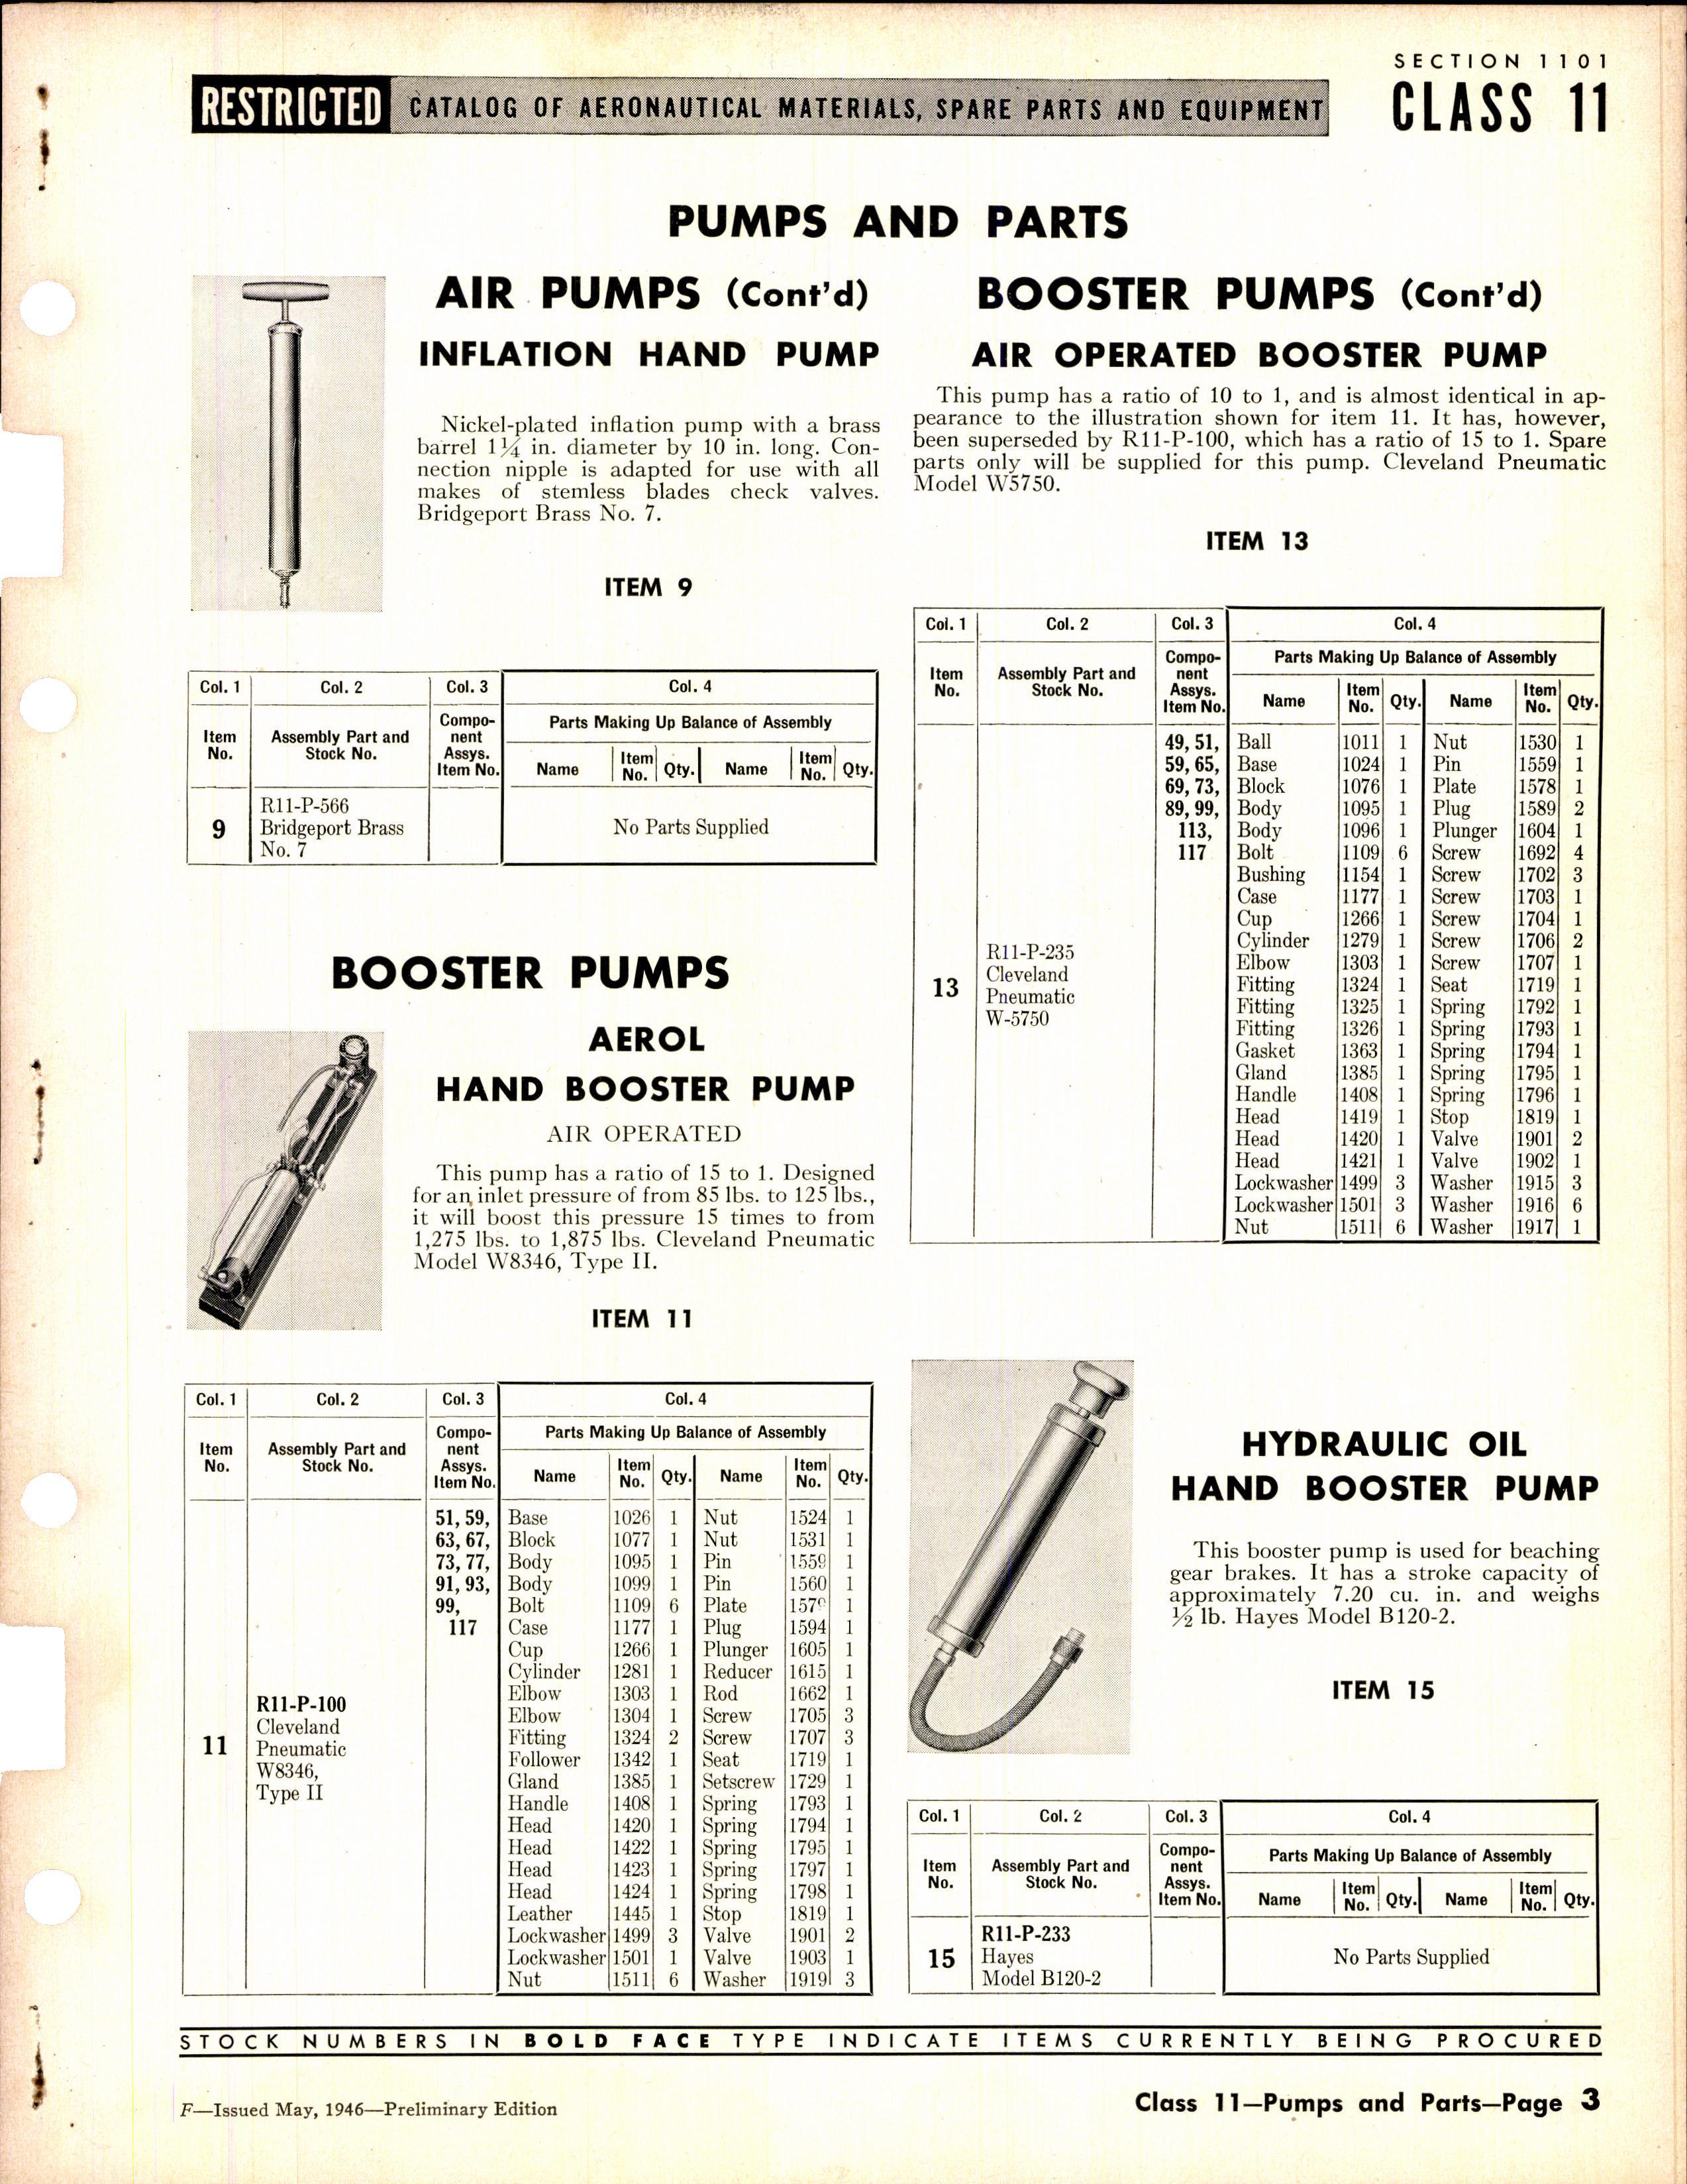 Sample page 3 from AirCorps Library document: Pumps and Parts